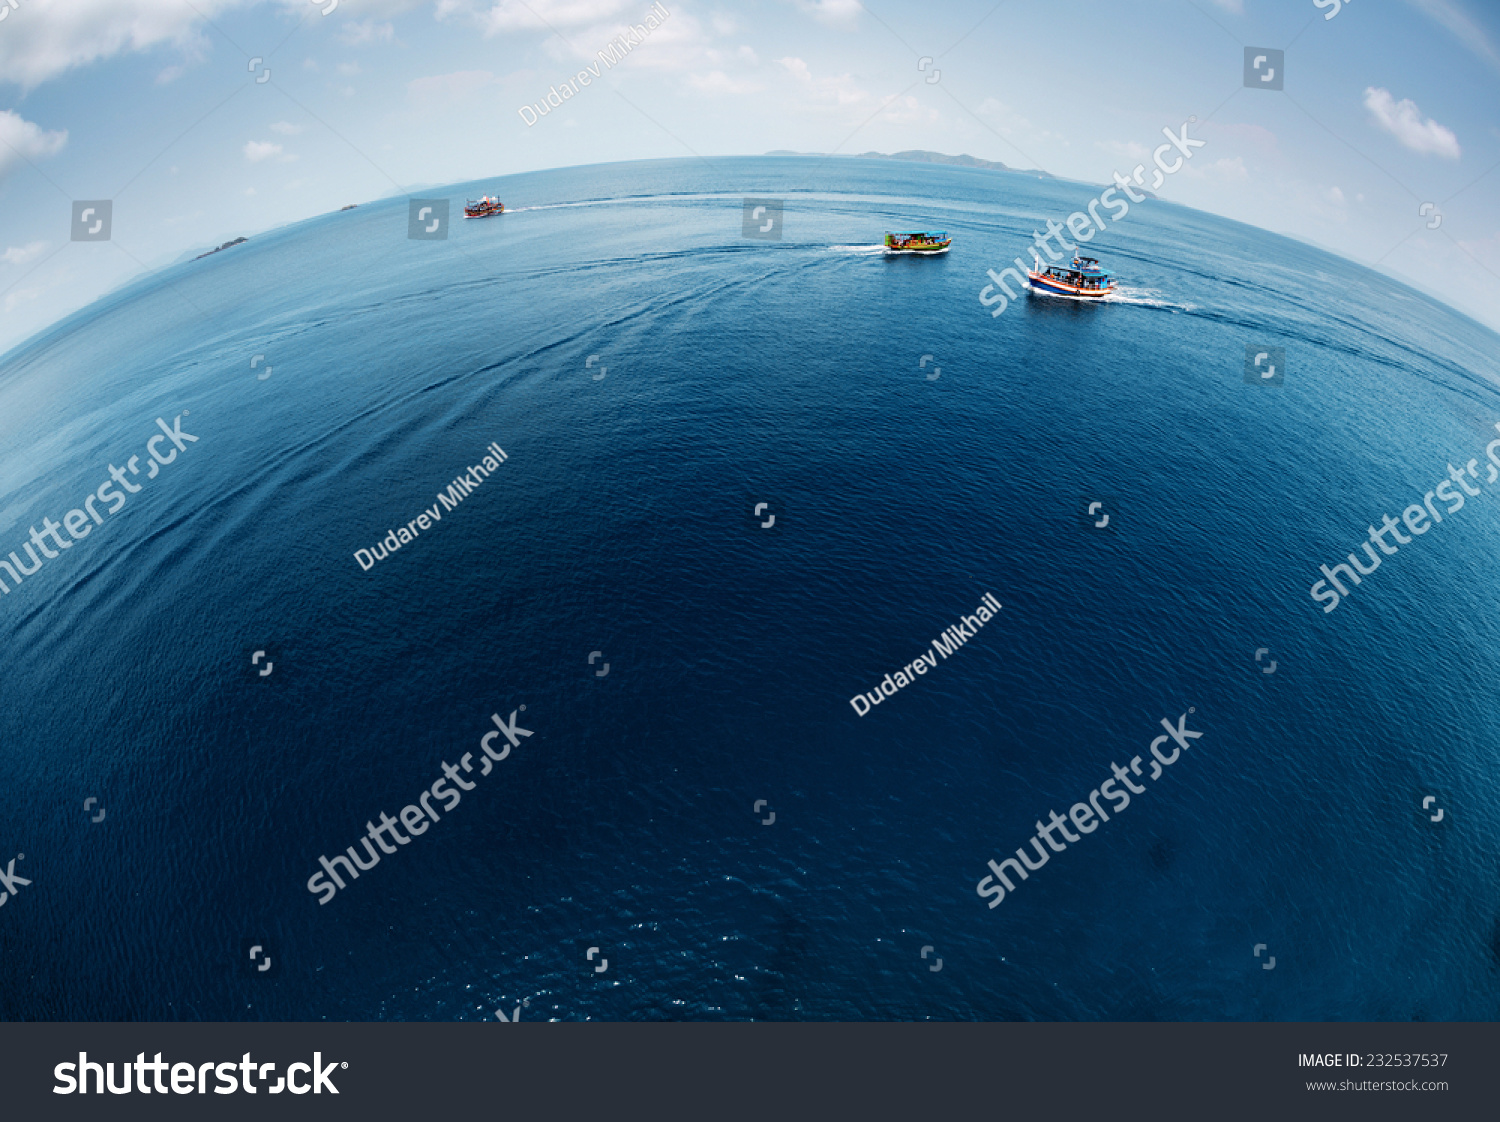 Aerial view of the calm tropical sea with ships on surface #232537537